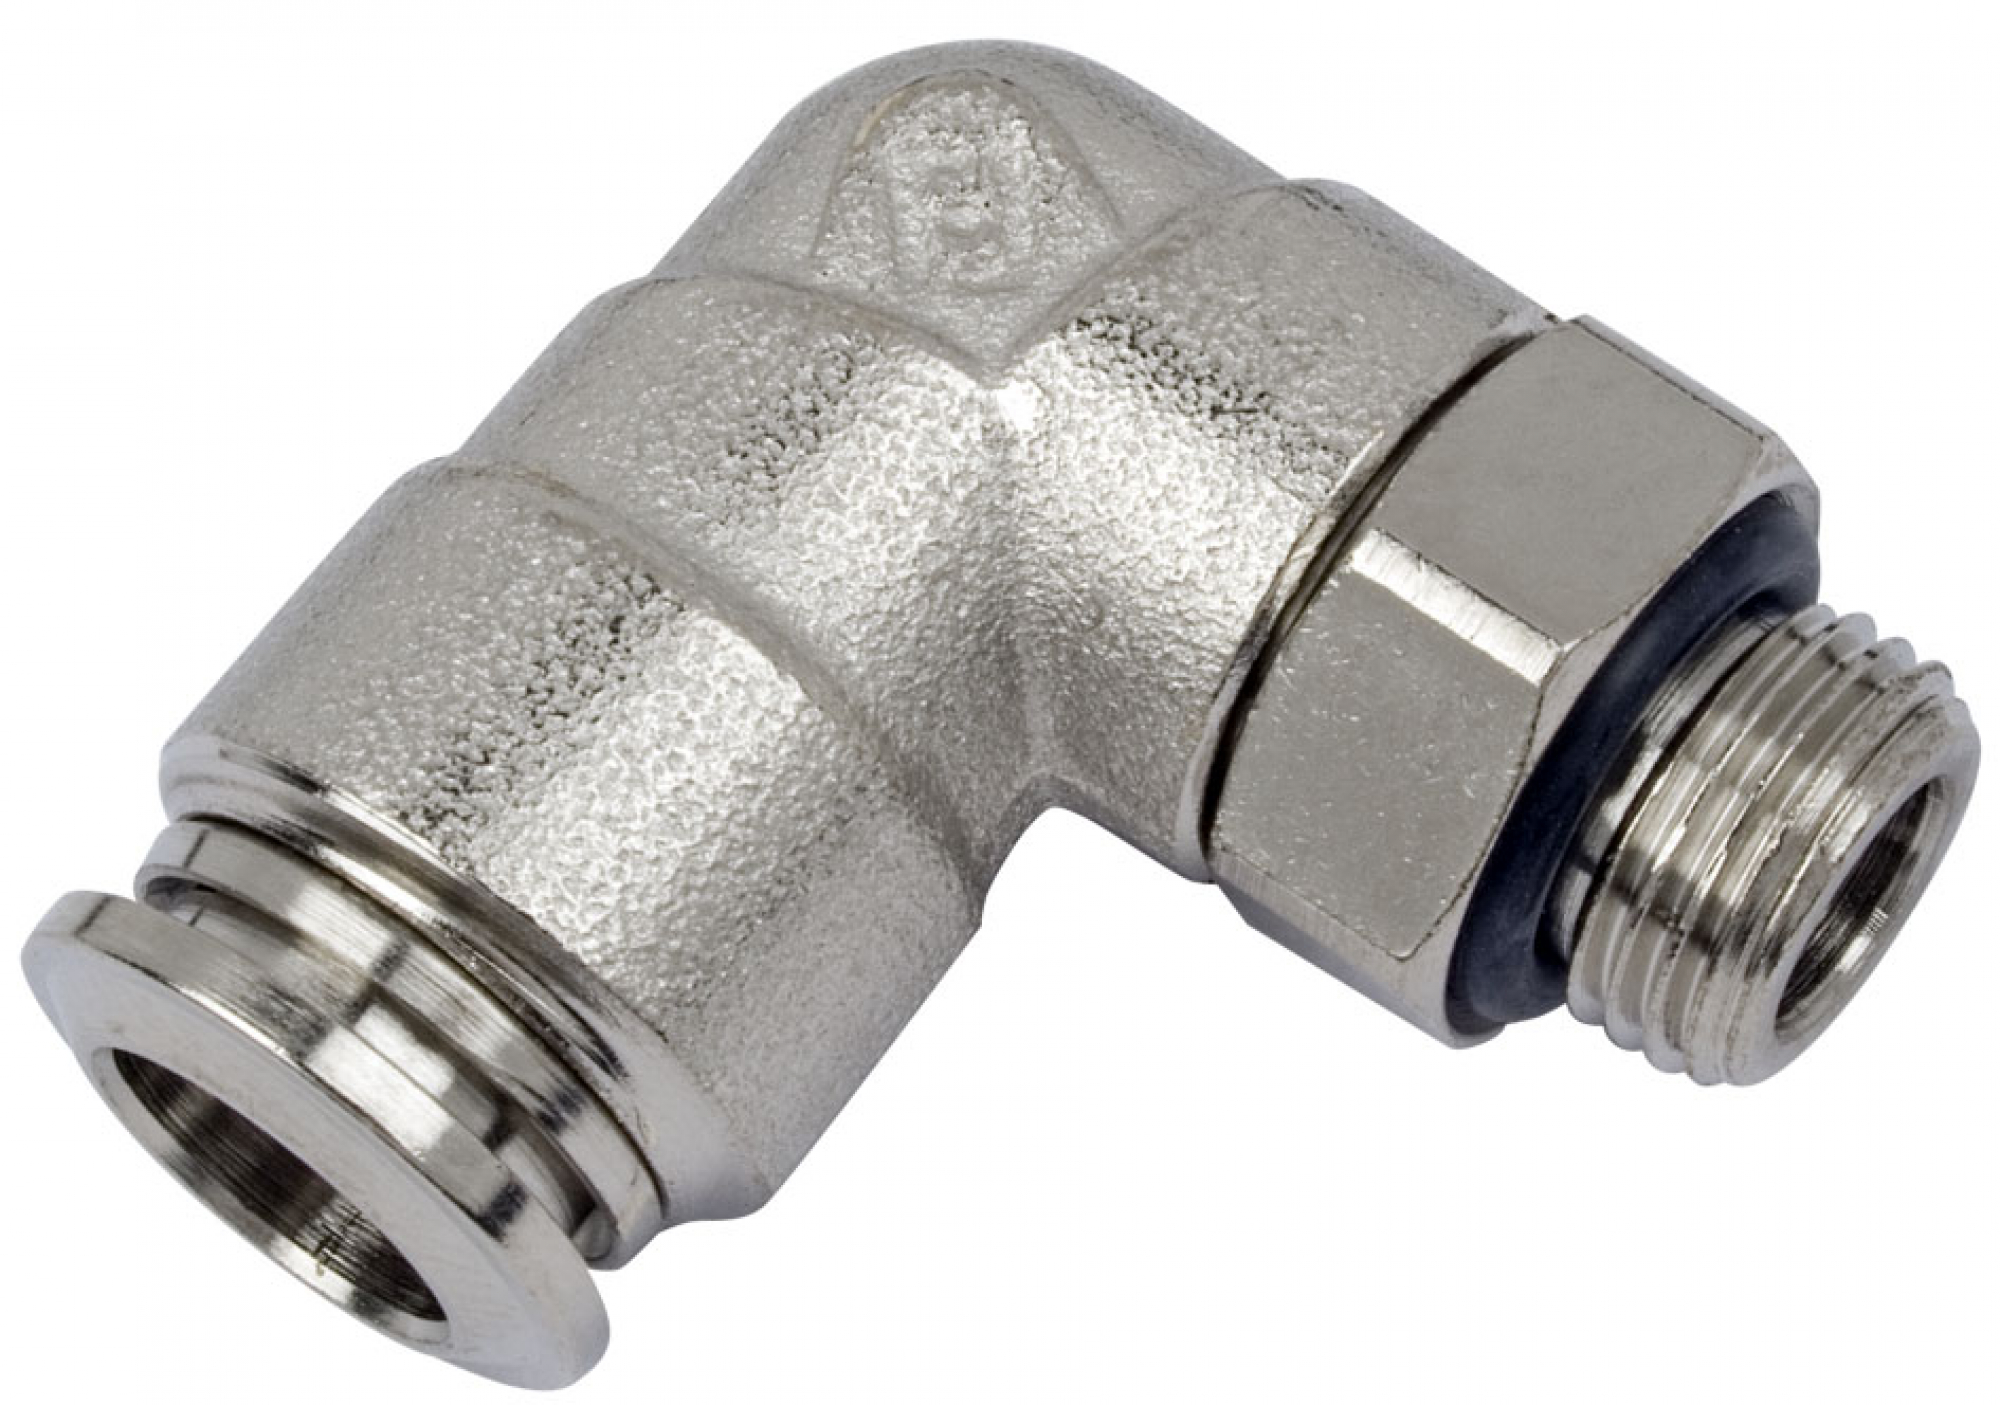 L - Push-Fitting 1/4" for hose 8 mm